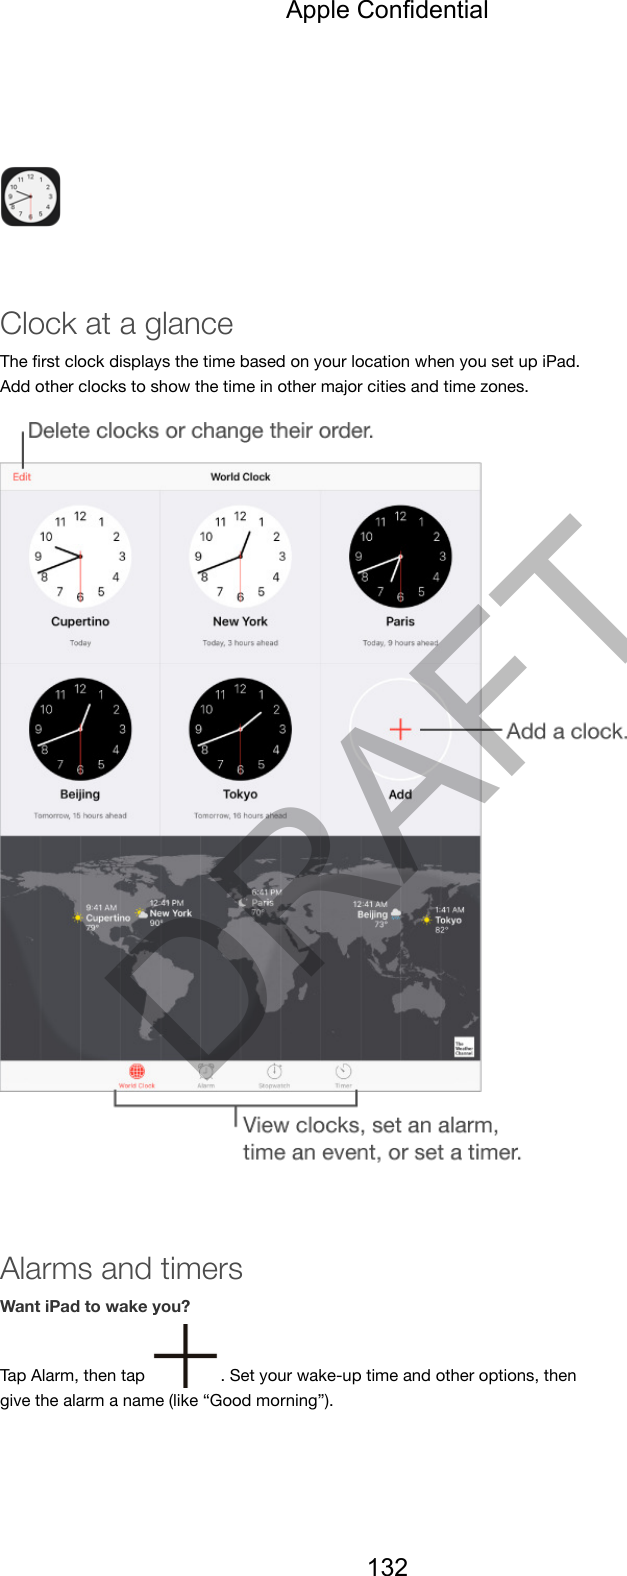 Clock at a glanceThe ﬁrst clock displays the time based on your location when you set up iPad.Add other clocks to show the time in other major cities and time zones.Alarms and timersWant iPad to wake you?Tap Alarm, then tap  . Set your wake-up time and other options, thengive the alarm a name (like “Good morning”).Apple Confidential132DRAFT